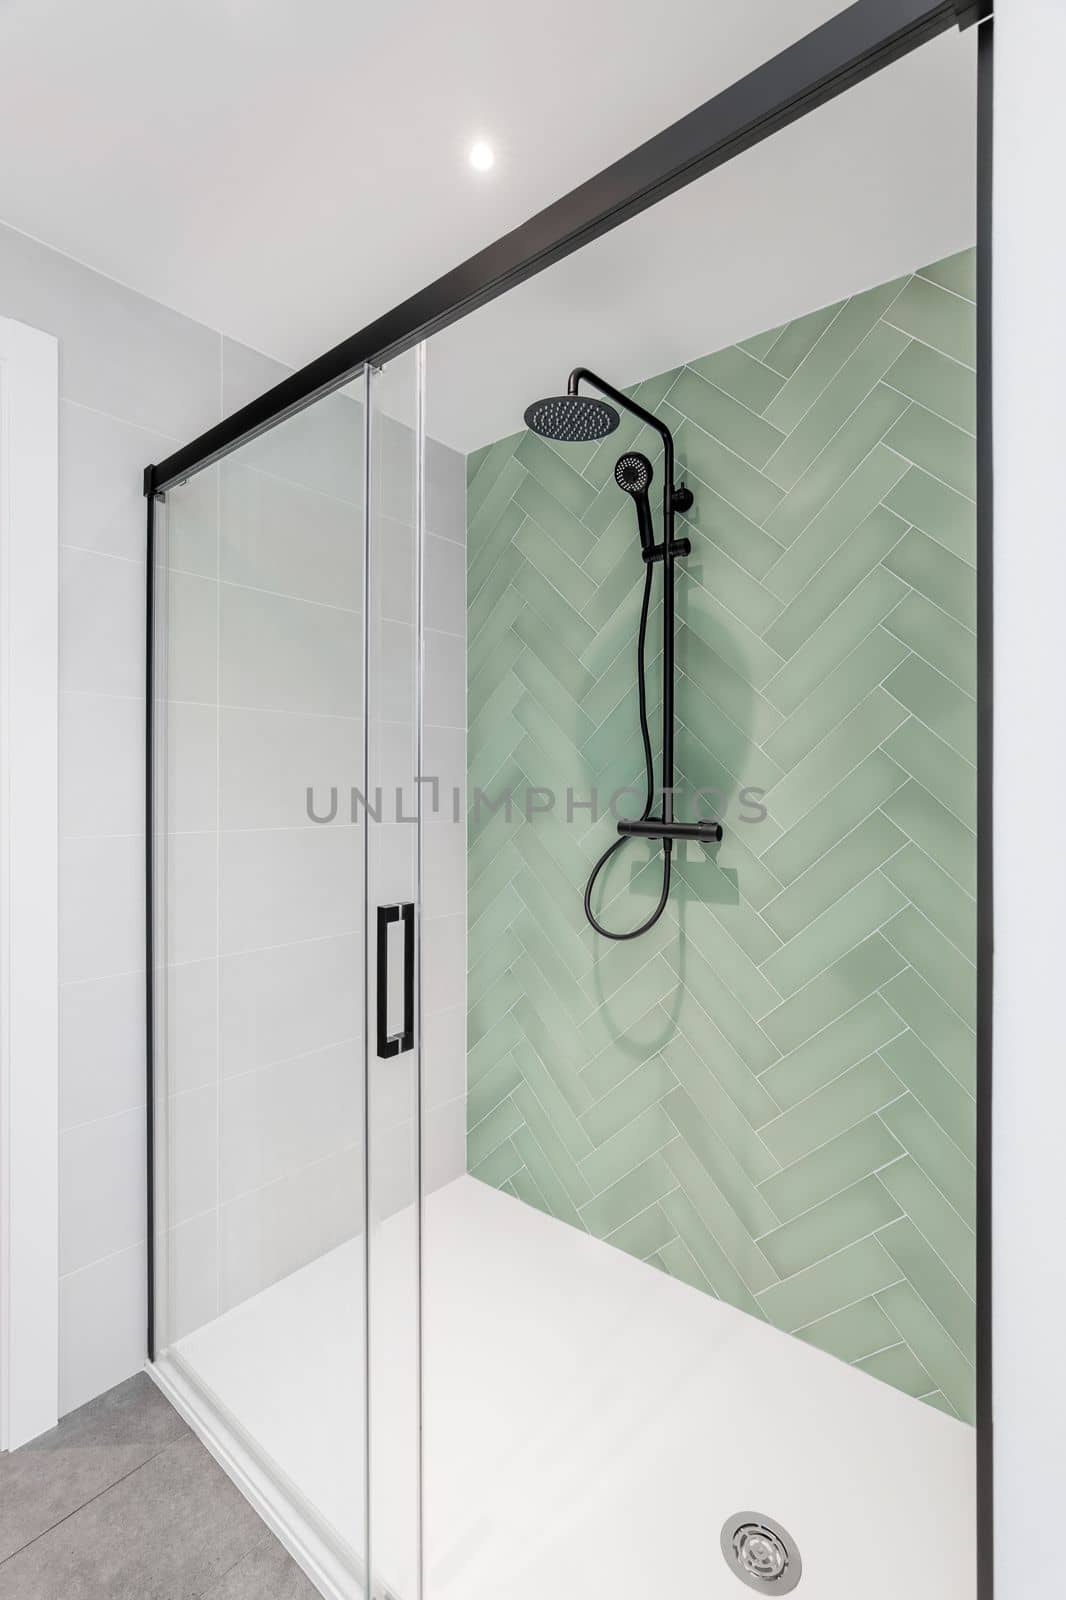 Modern bathroom with light green and white tiles, rain head, hand held shower and glass door. by apavlin